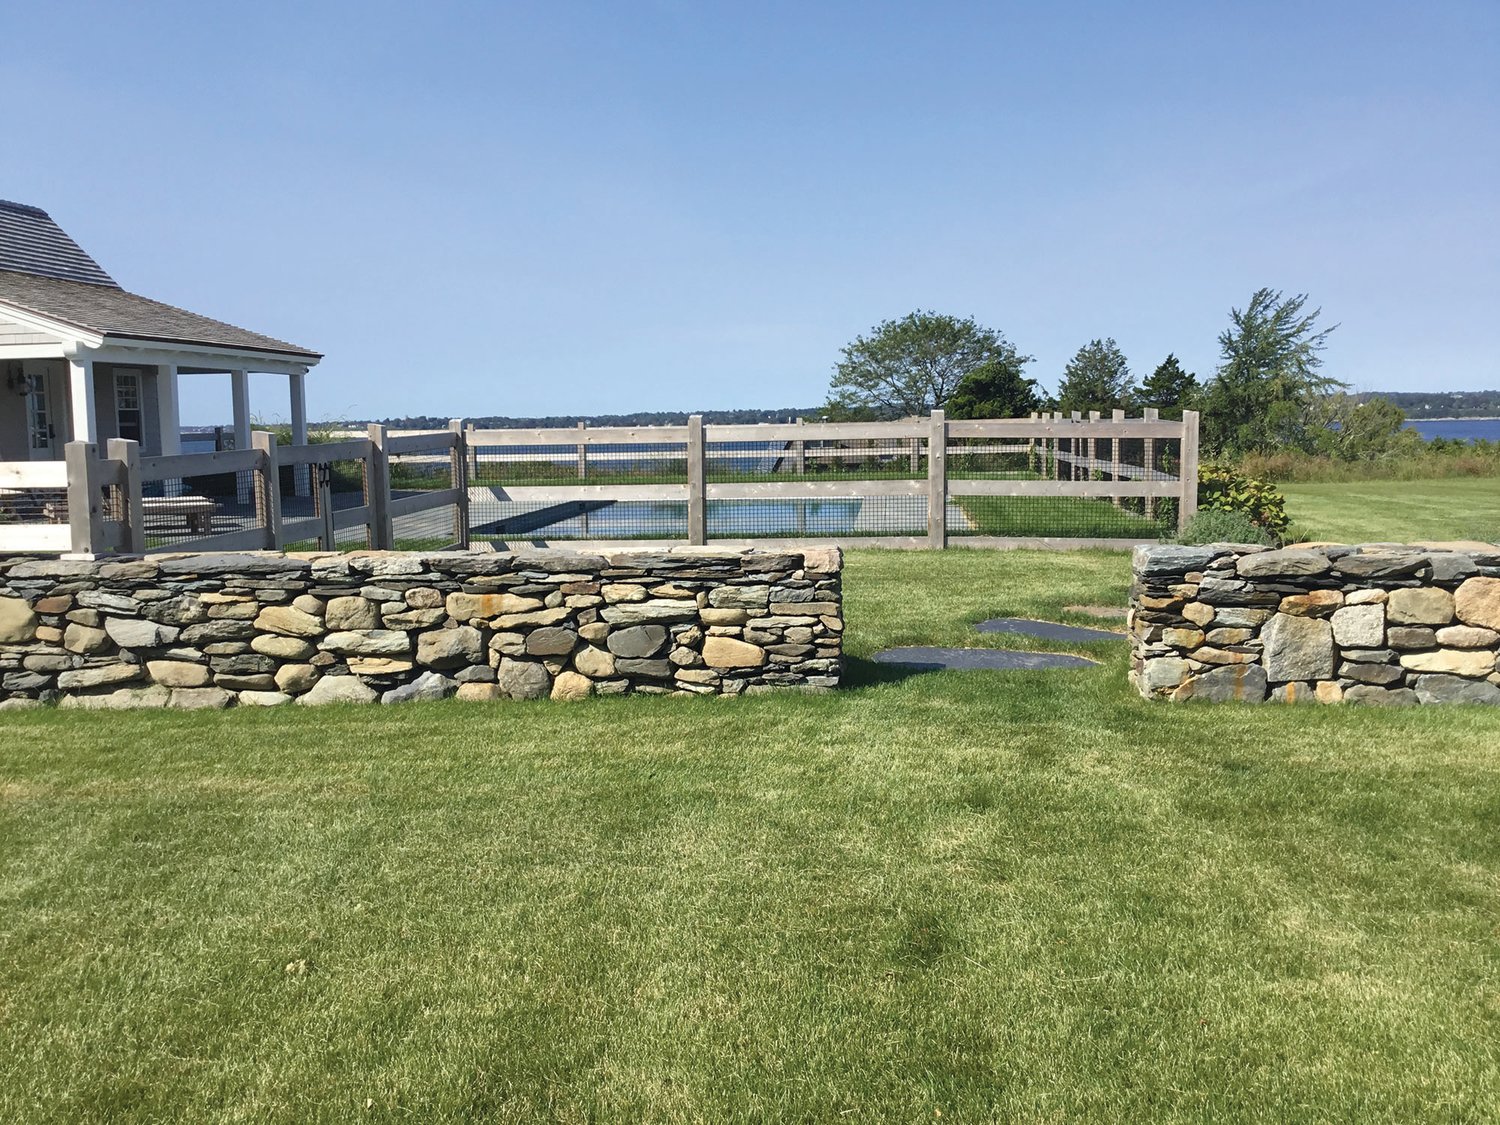 The new stone wall encircles an area of the property featuring a newly constructed barn, pool house and pool. Seen here, the wall under construction, and the finished product, with views out over the Sakonnet River.